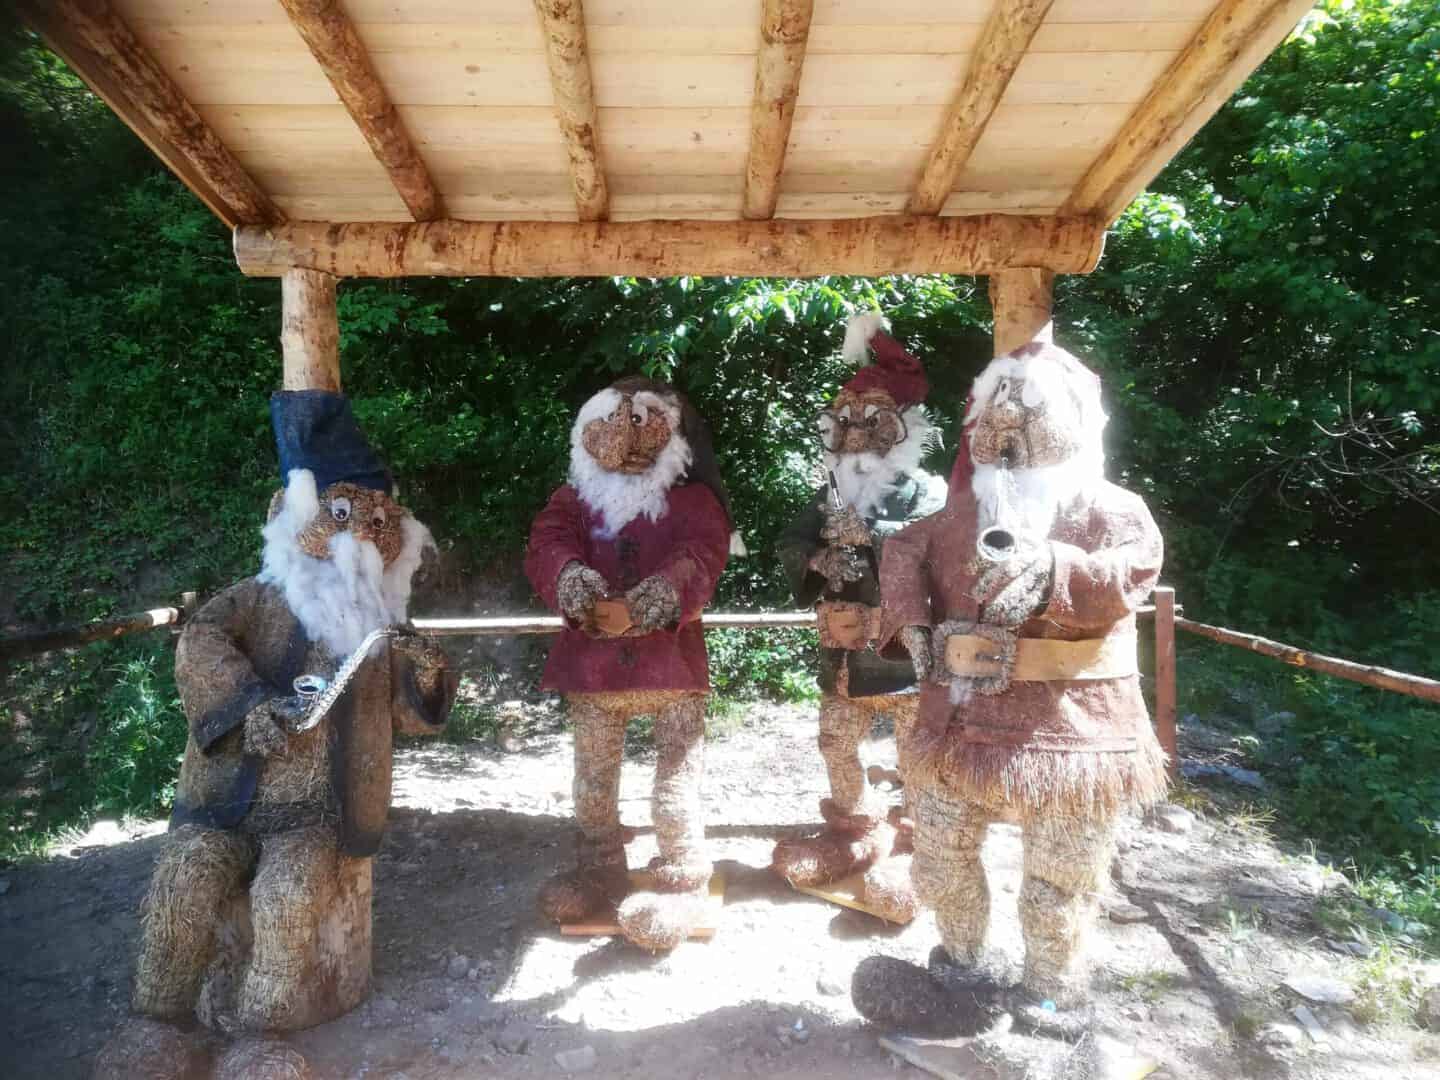 Dwarf music at the hay figure path scaled